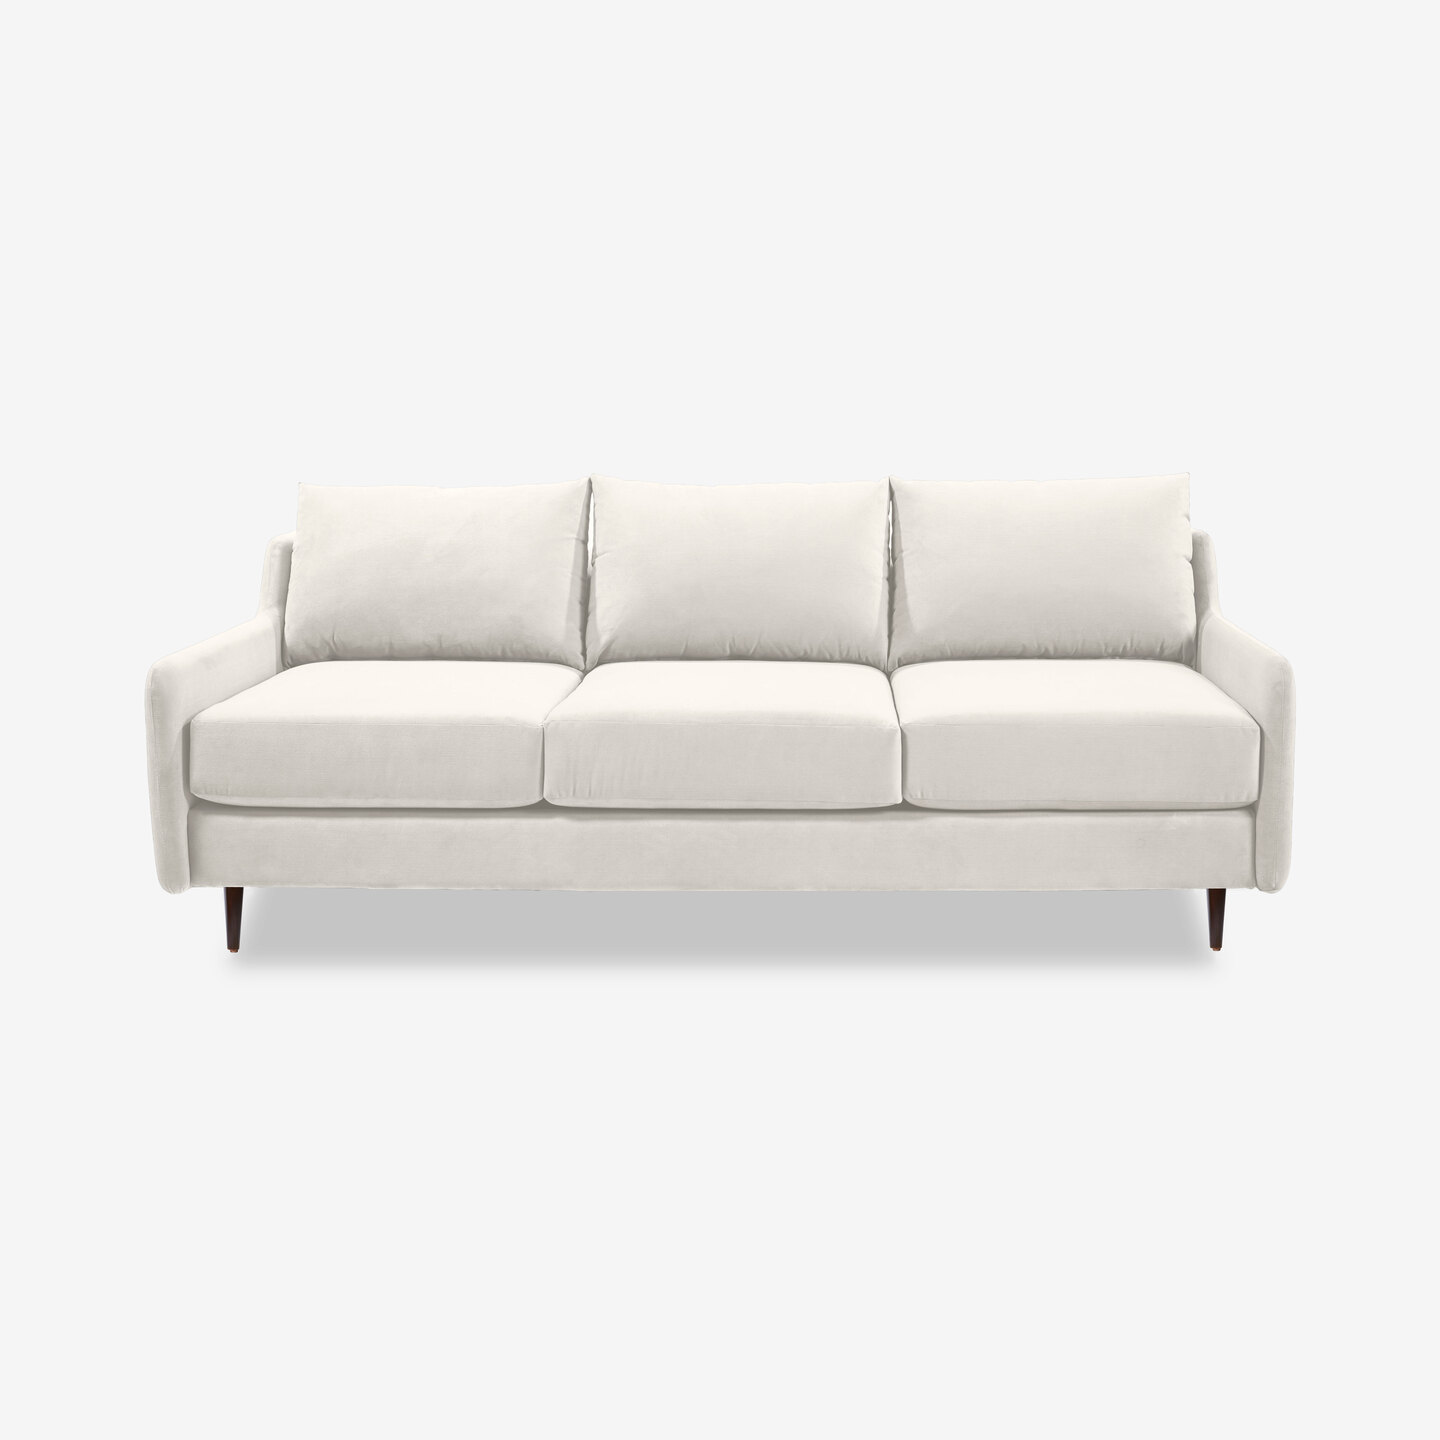 1375_Brooks-Sofa-Swoop-Arm-White_Front_2021